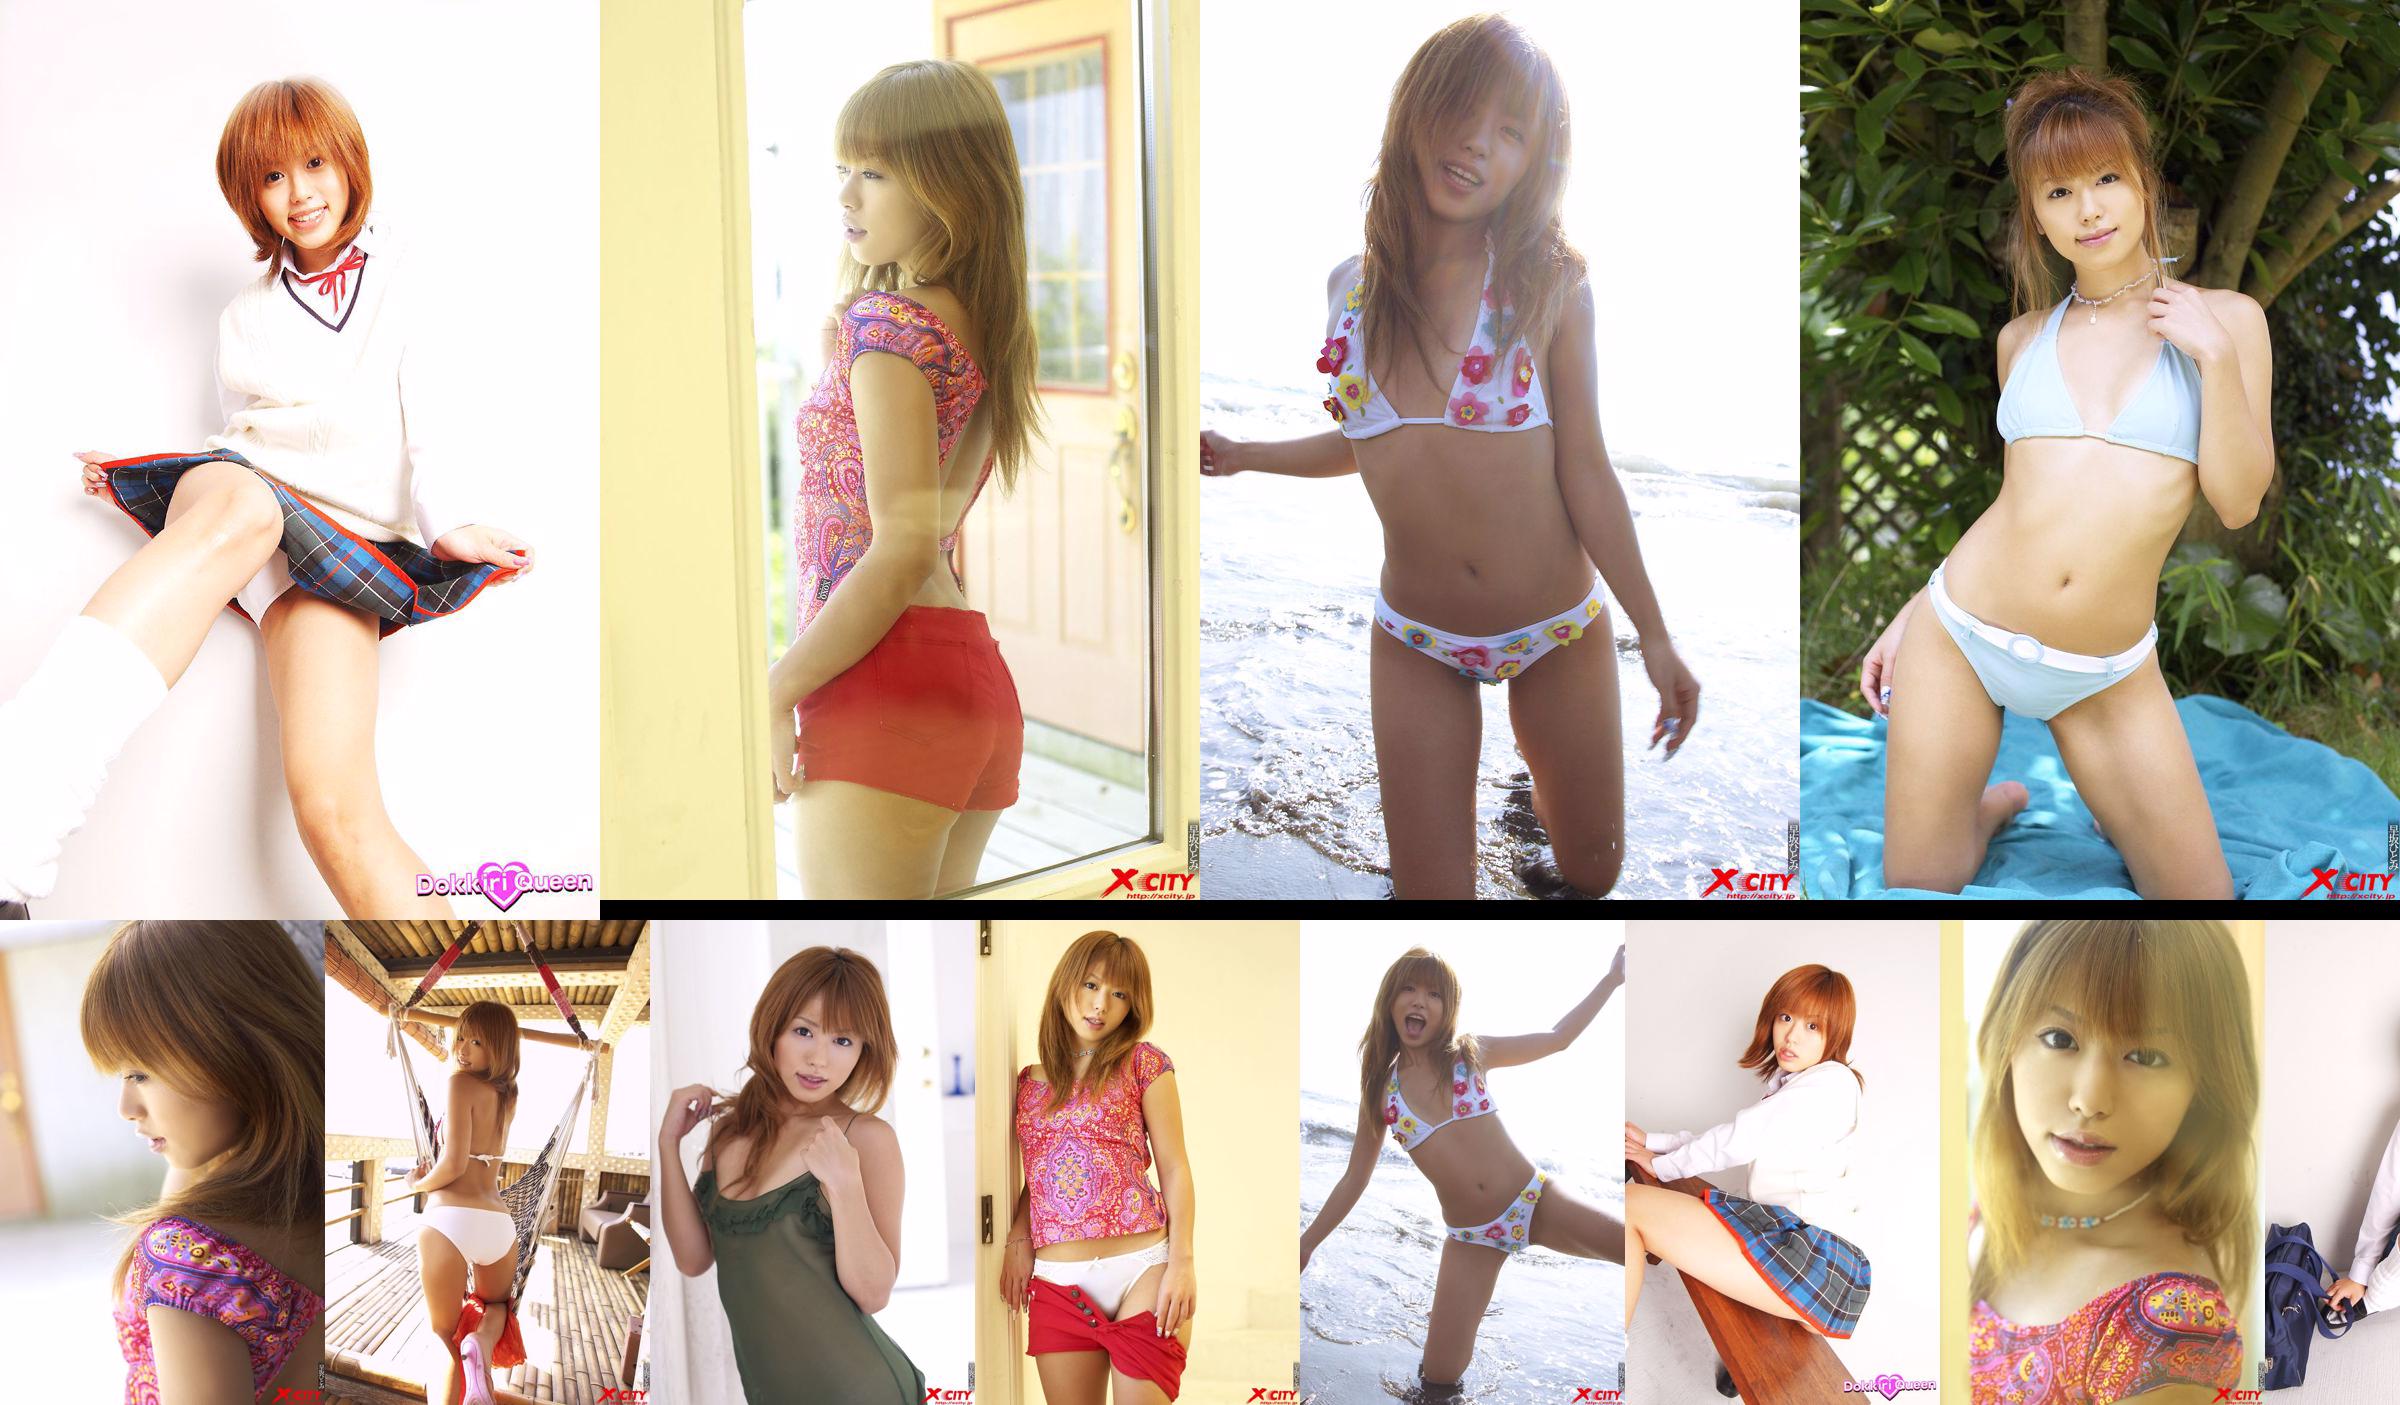 Shiina れ い か "Sprinkled Jewel" [Graphis] Gals No.3837dd Page 23